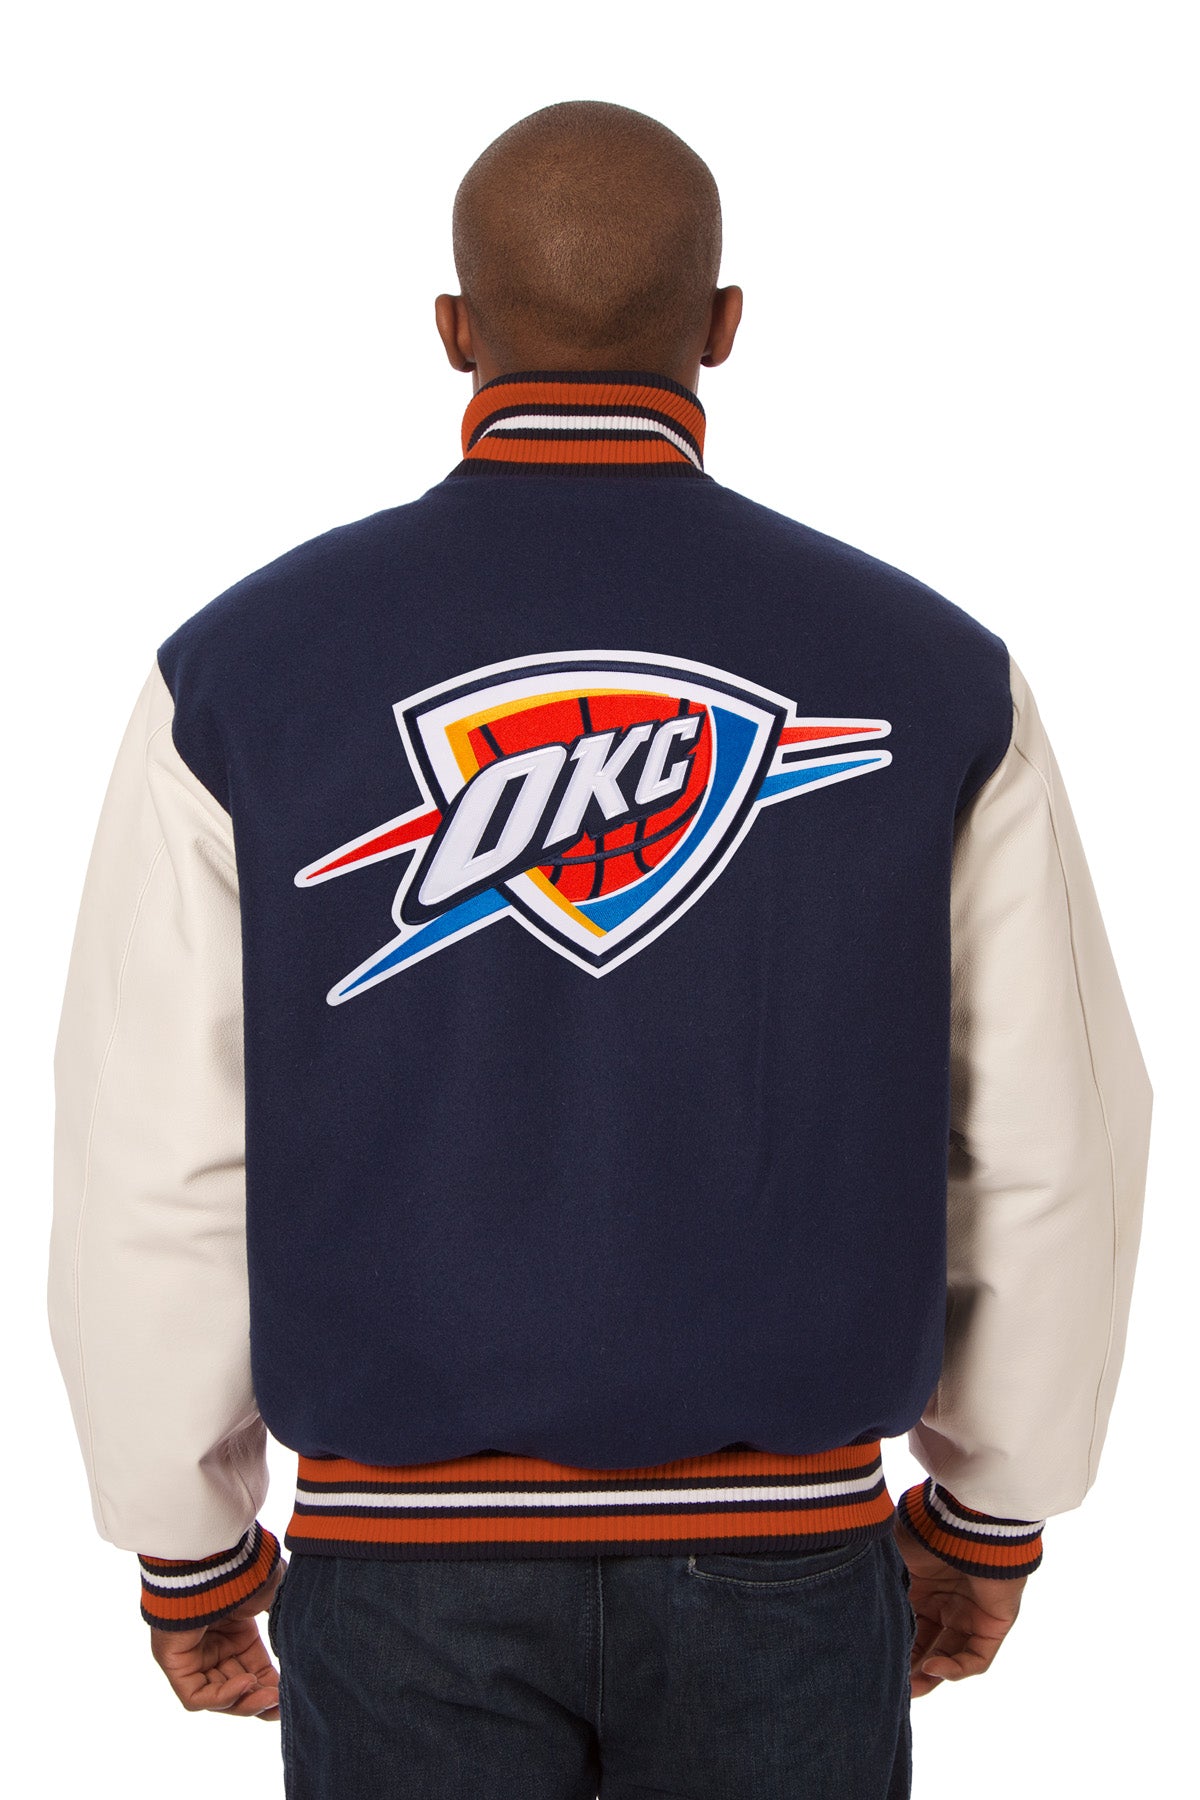 Oklahoma City Thunder Embroidered Wool and Leather Jacket